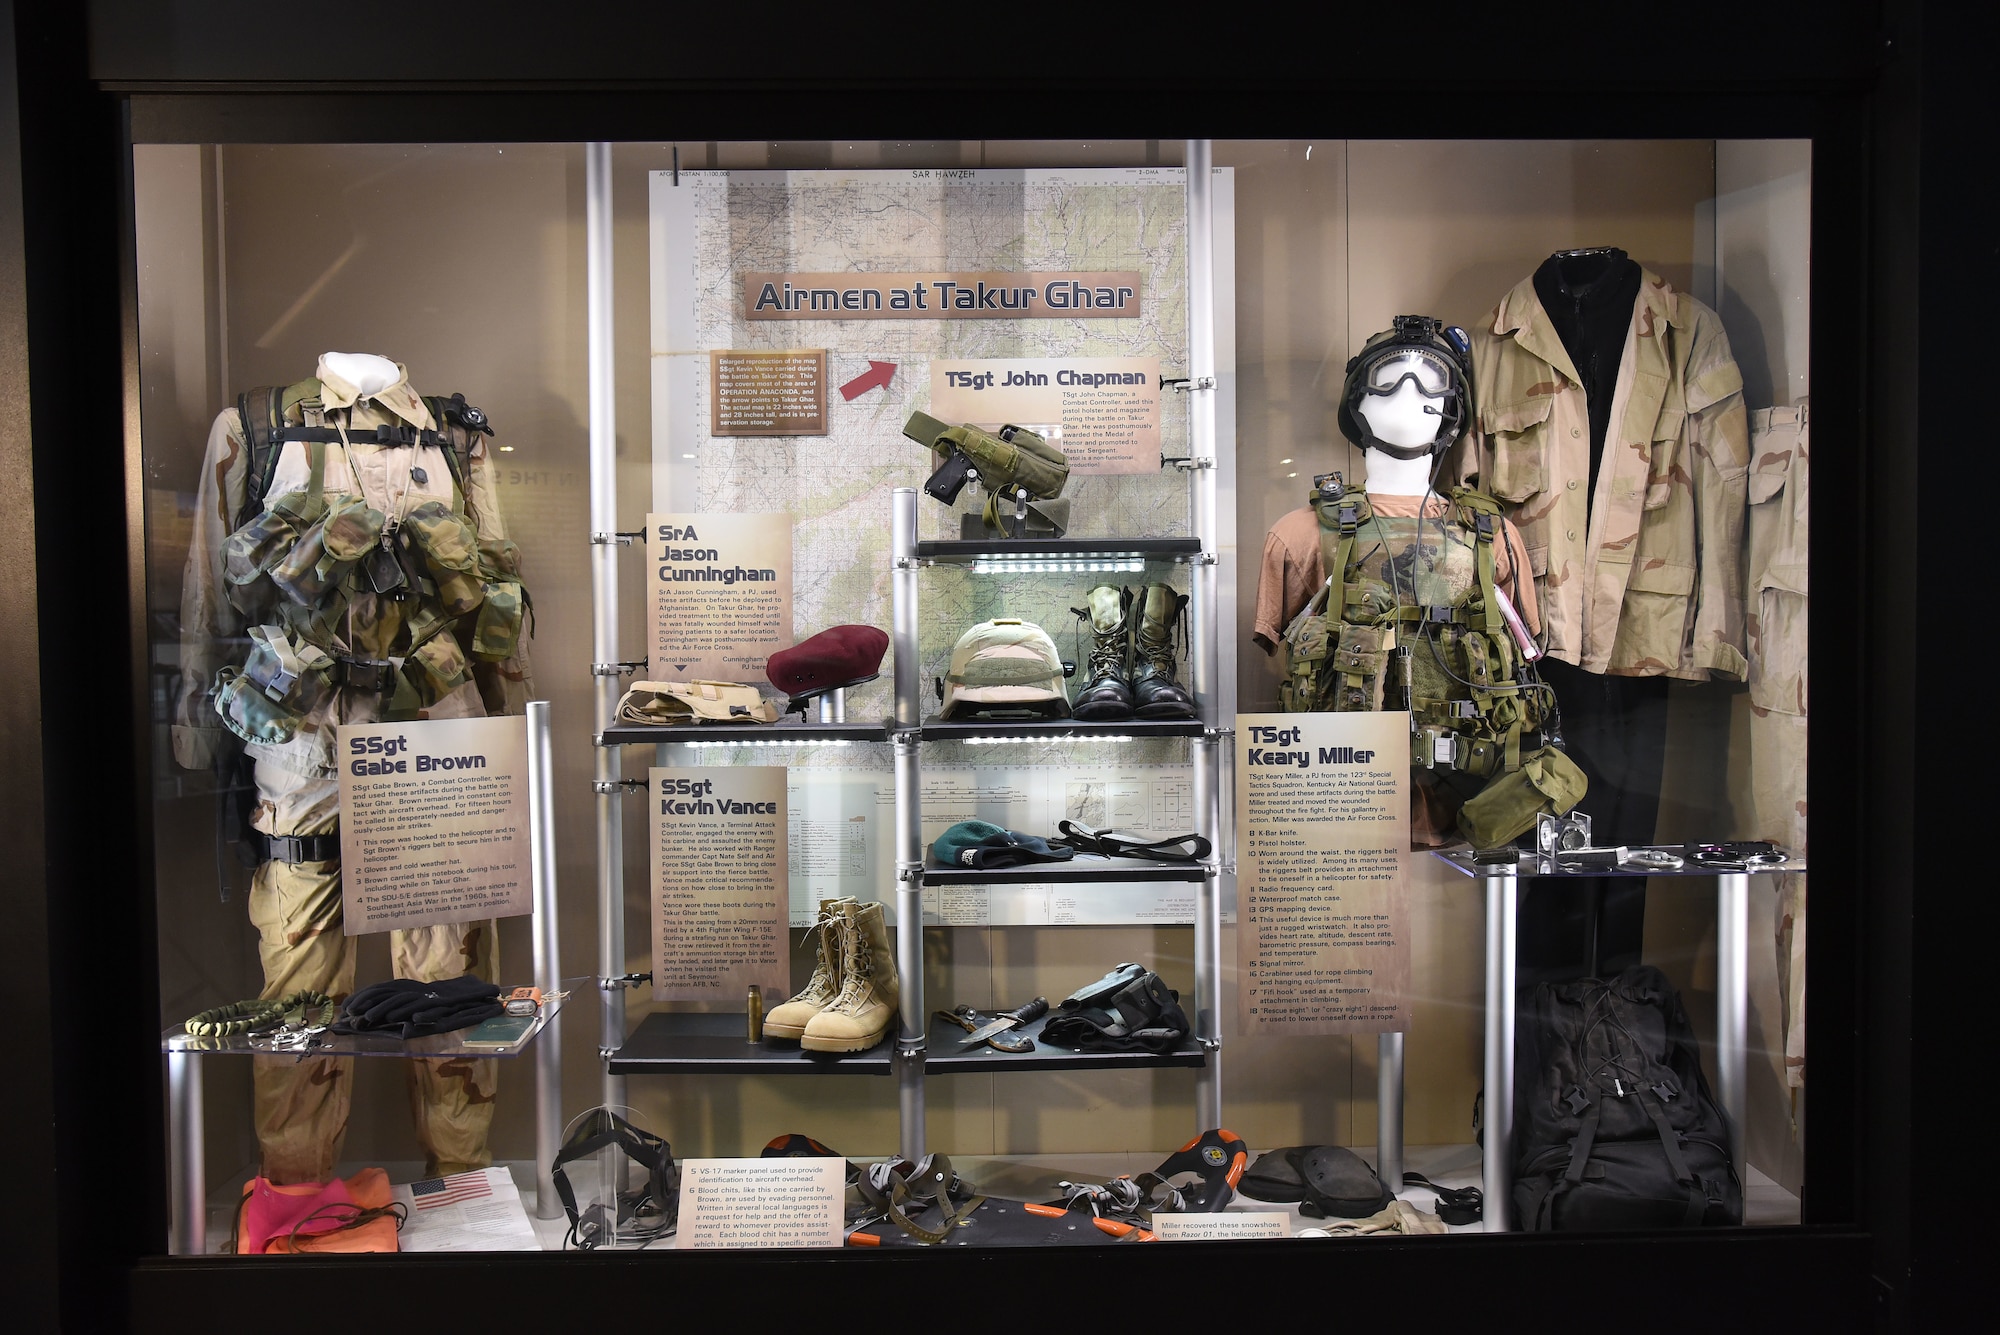 A portion of the Warrior Airmen exhibit, highlighting Airmen at Takur Ghar, on display in the Cold War Gallery at the National Museum of the U.S. Air Force. (U.S. Air Force photo by Ken LaRock)